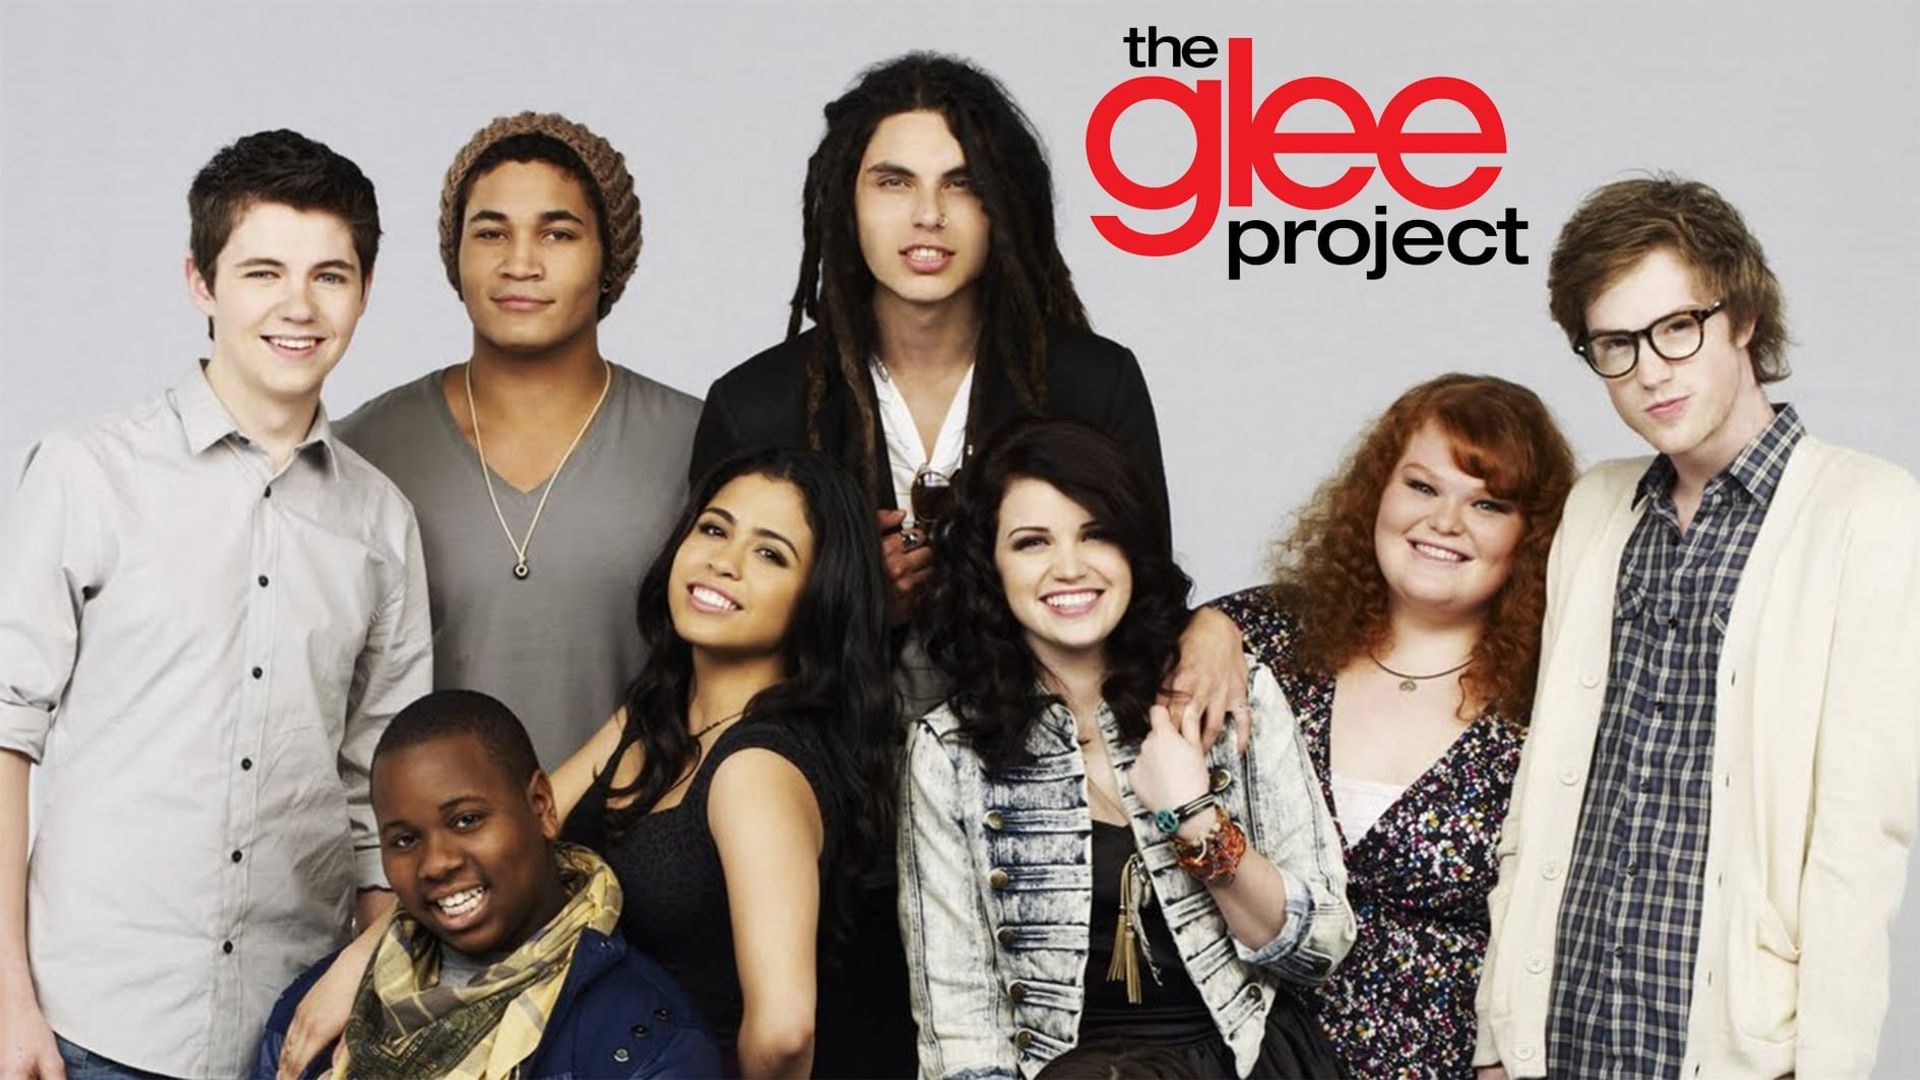 The Glee Project background